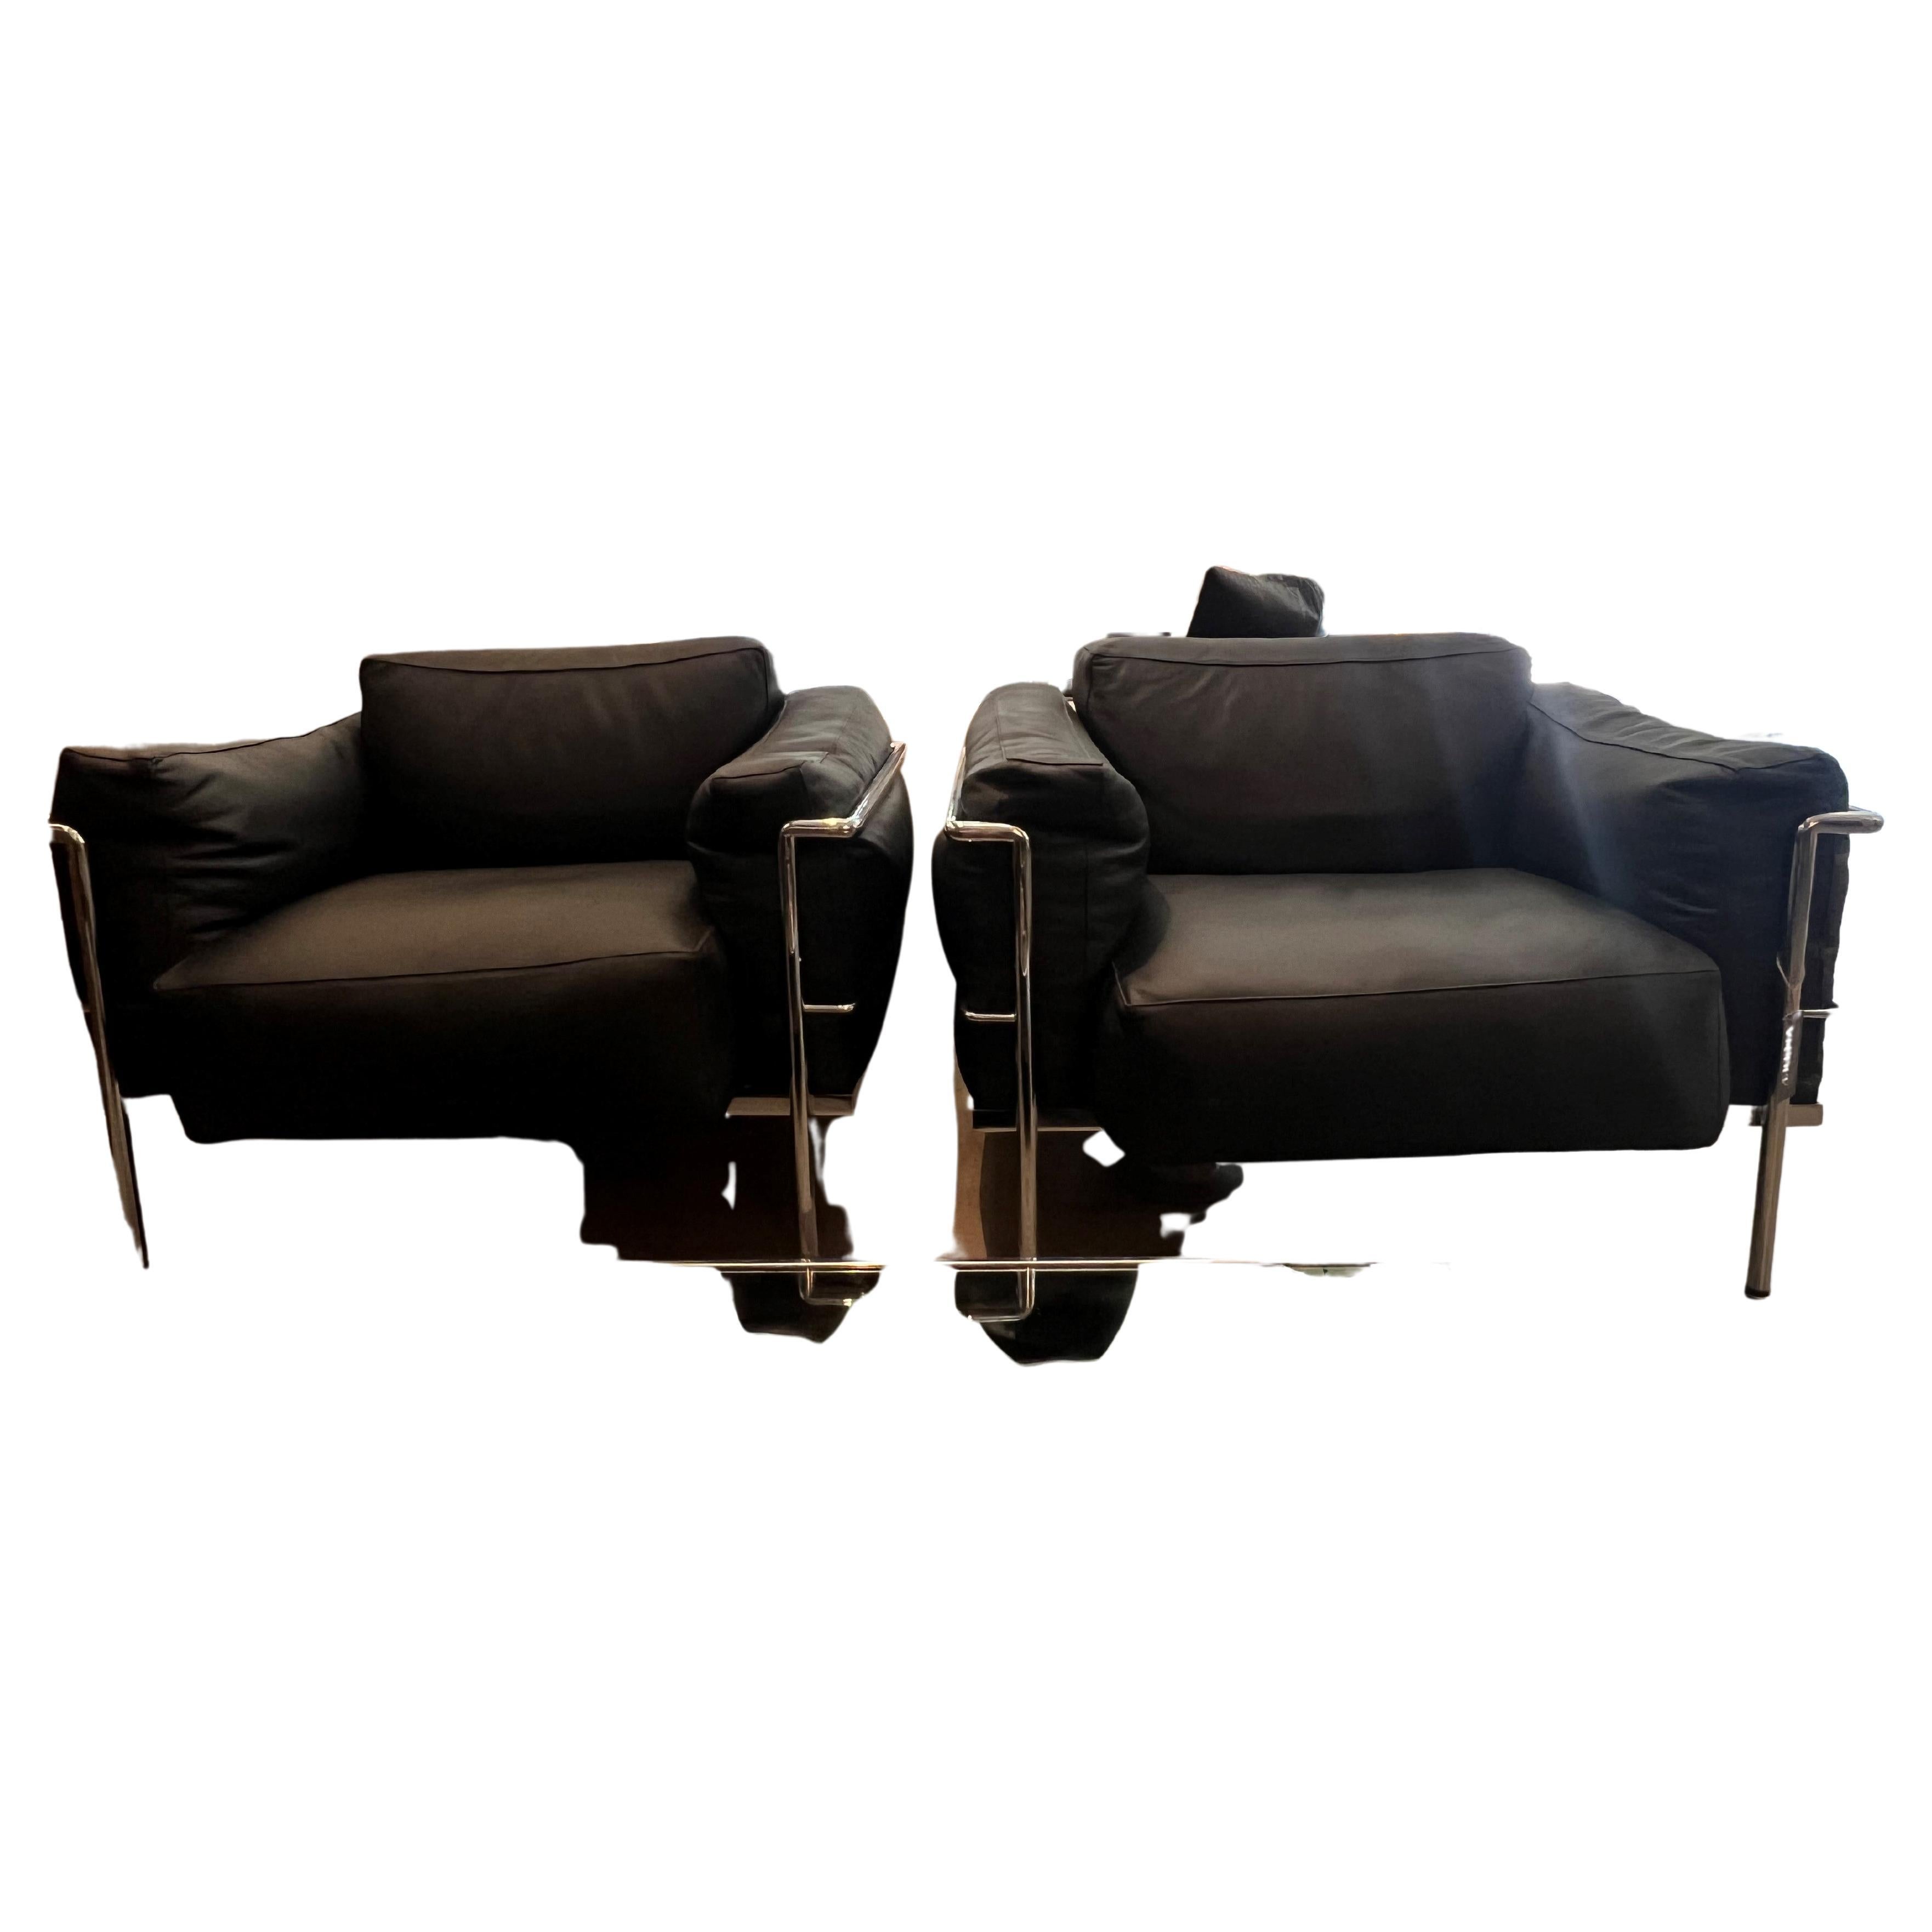 Le Corbusier, Wide Lounge Chairs For Sale